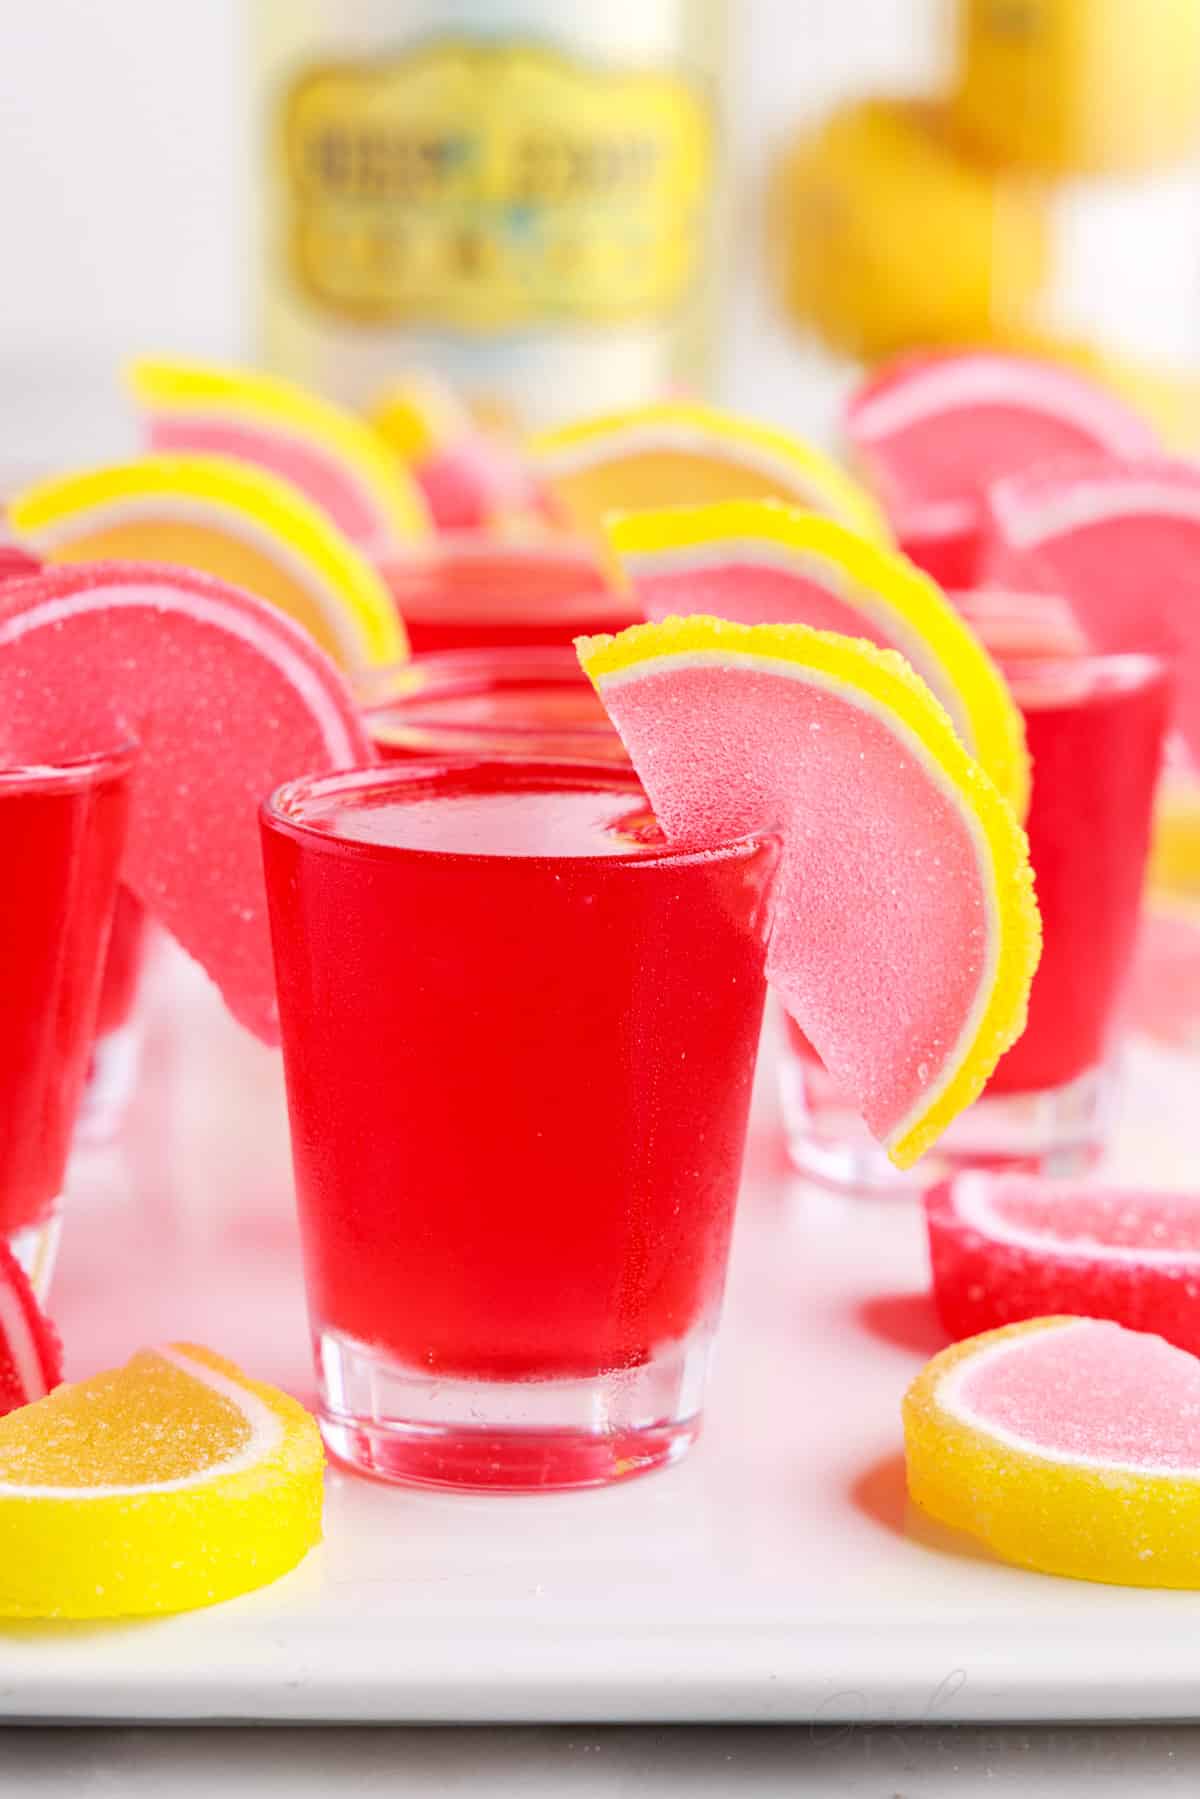 pink lemonade jello shots with candies hanging on the glass for garnish